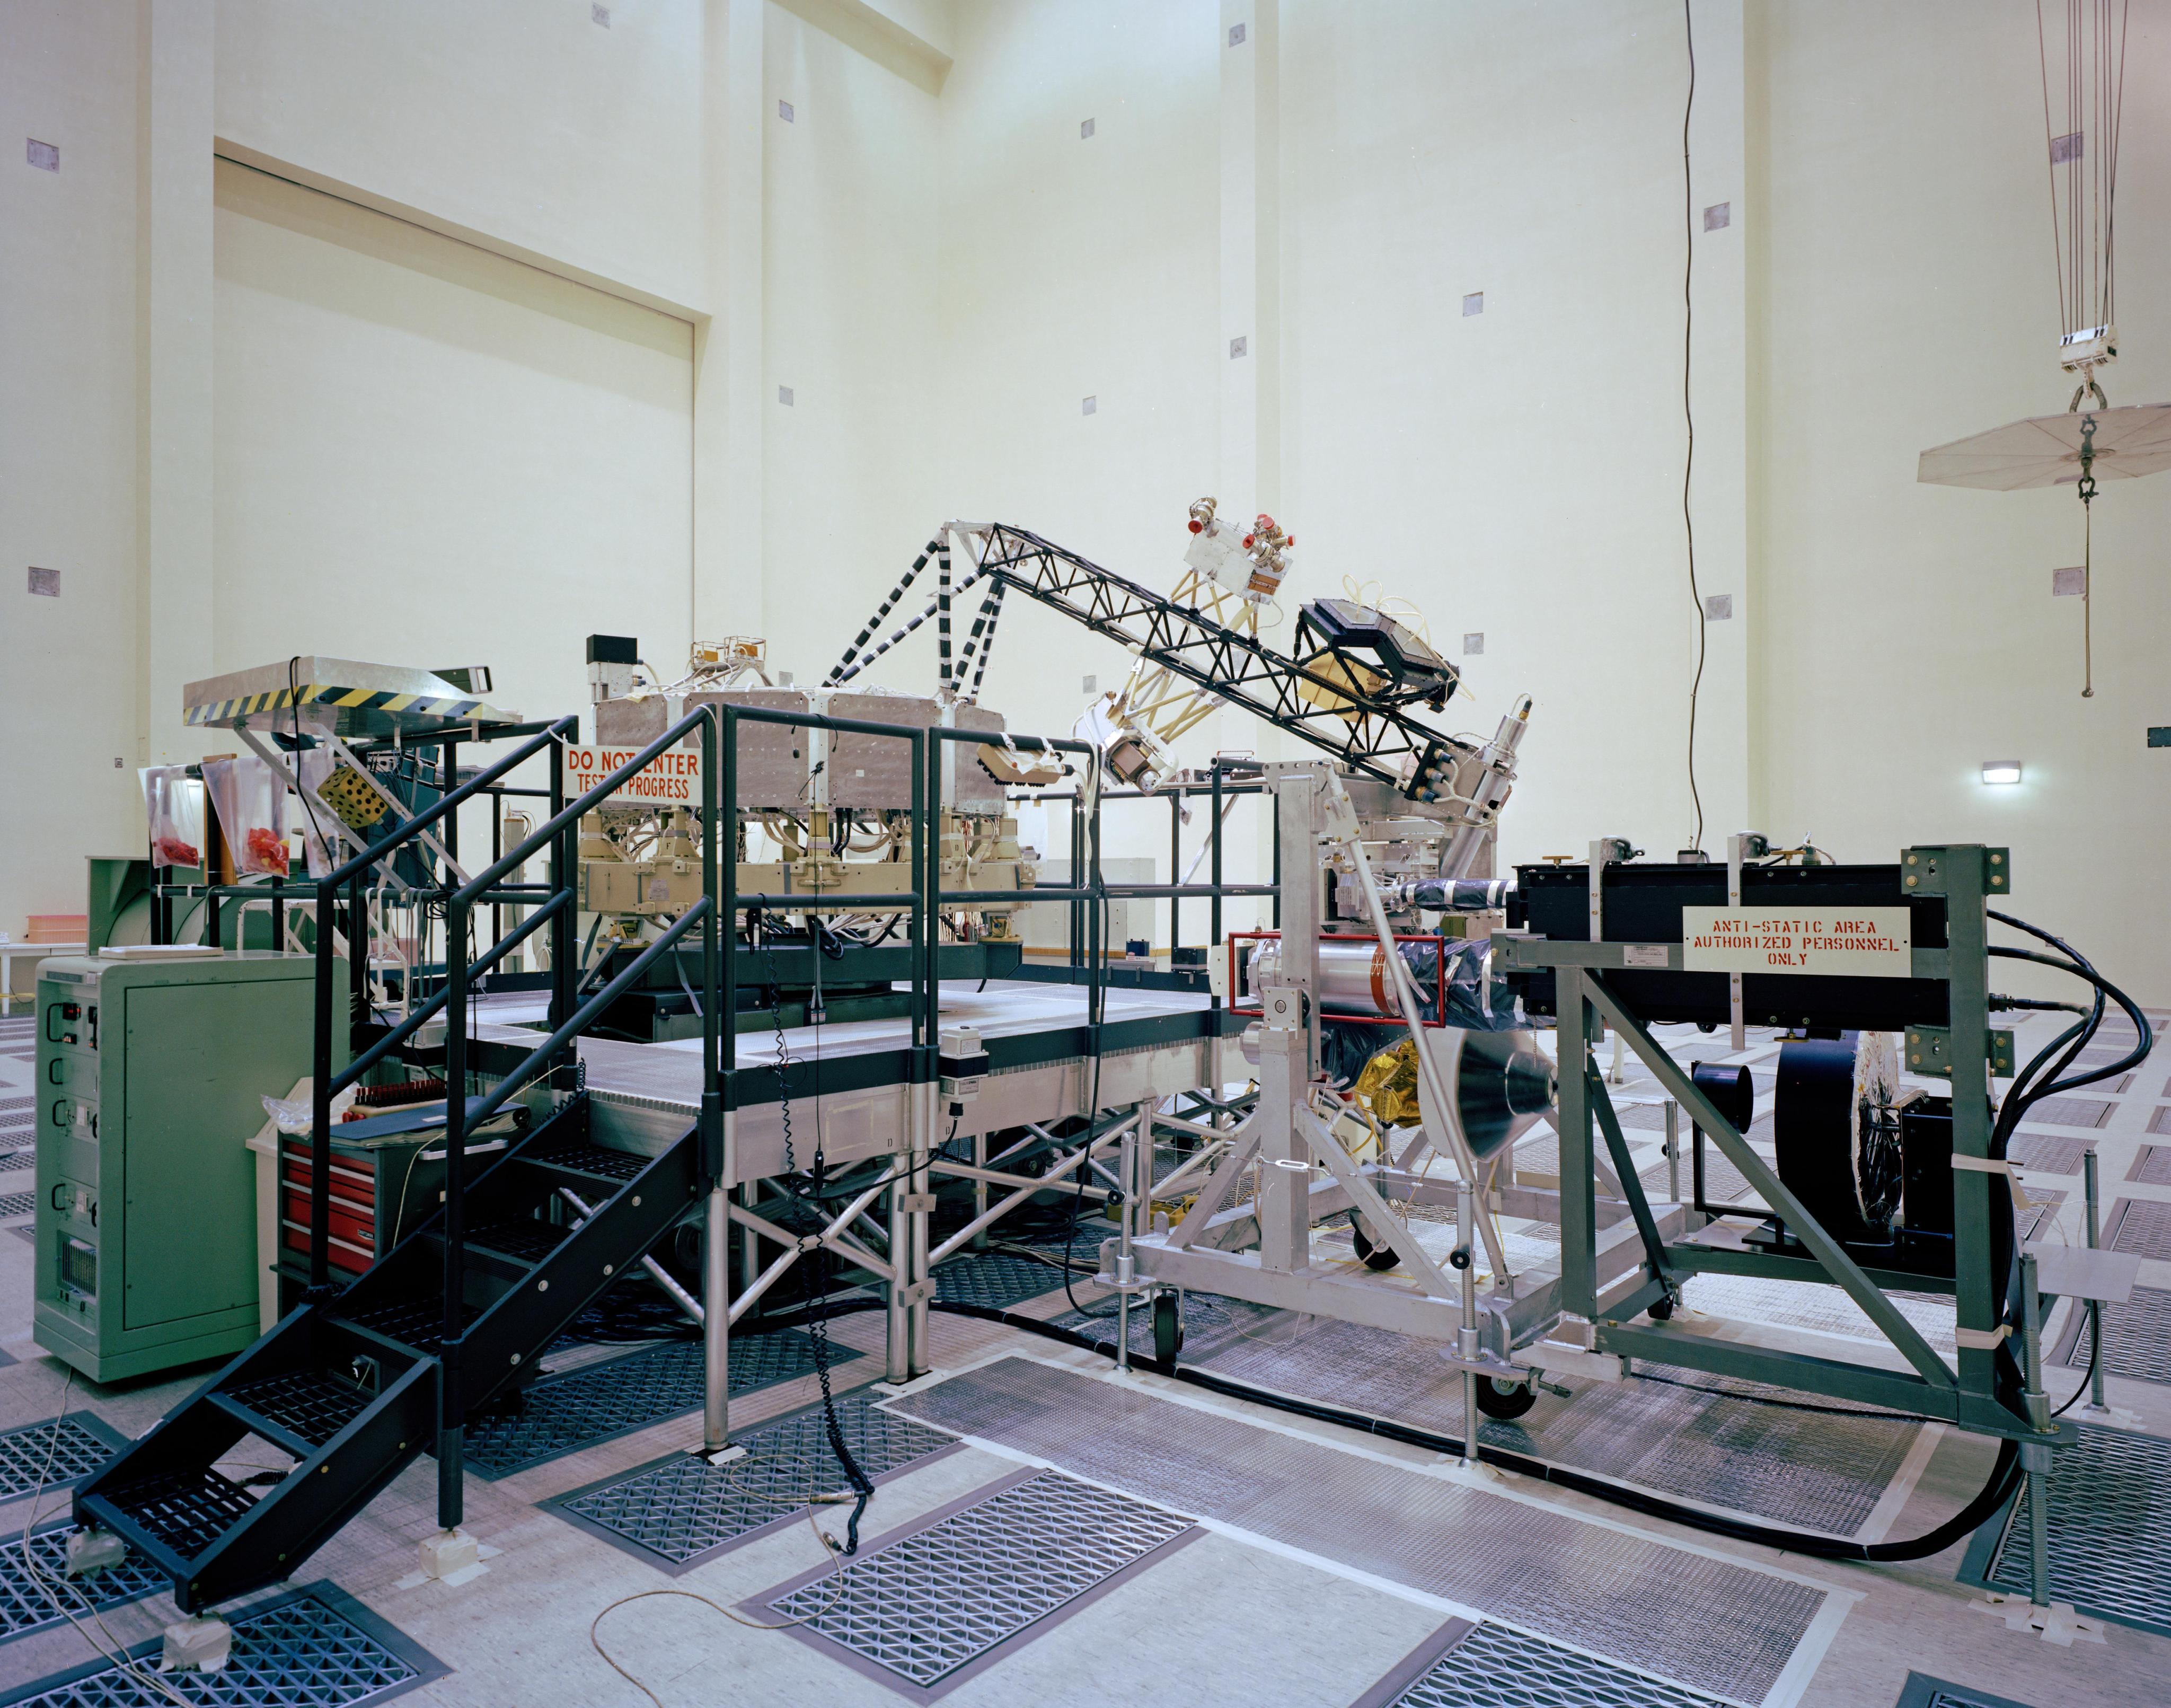 System test configuration for Voyager. The spacecraft's 10-sided bus is visible behind the catwalk railing in the foreground. The boom that holds several of the spacecraft's science instruments arches above the railing.